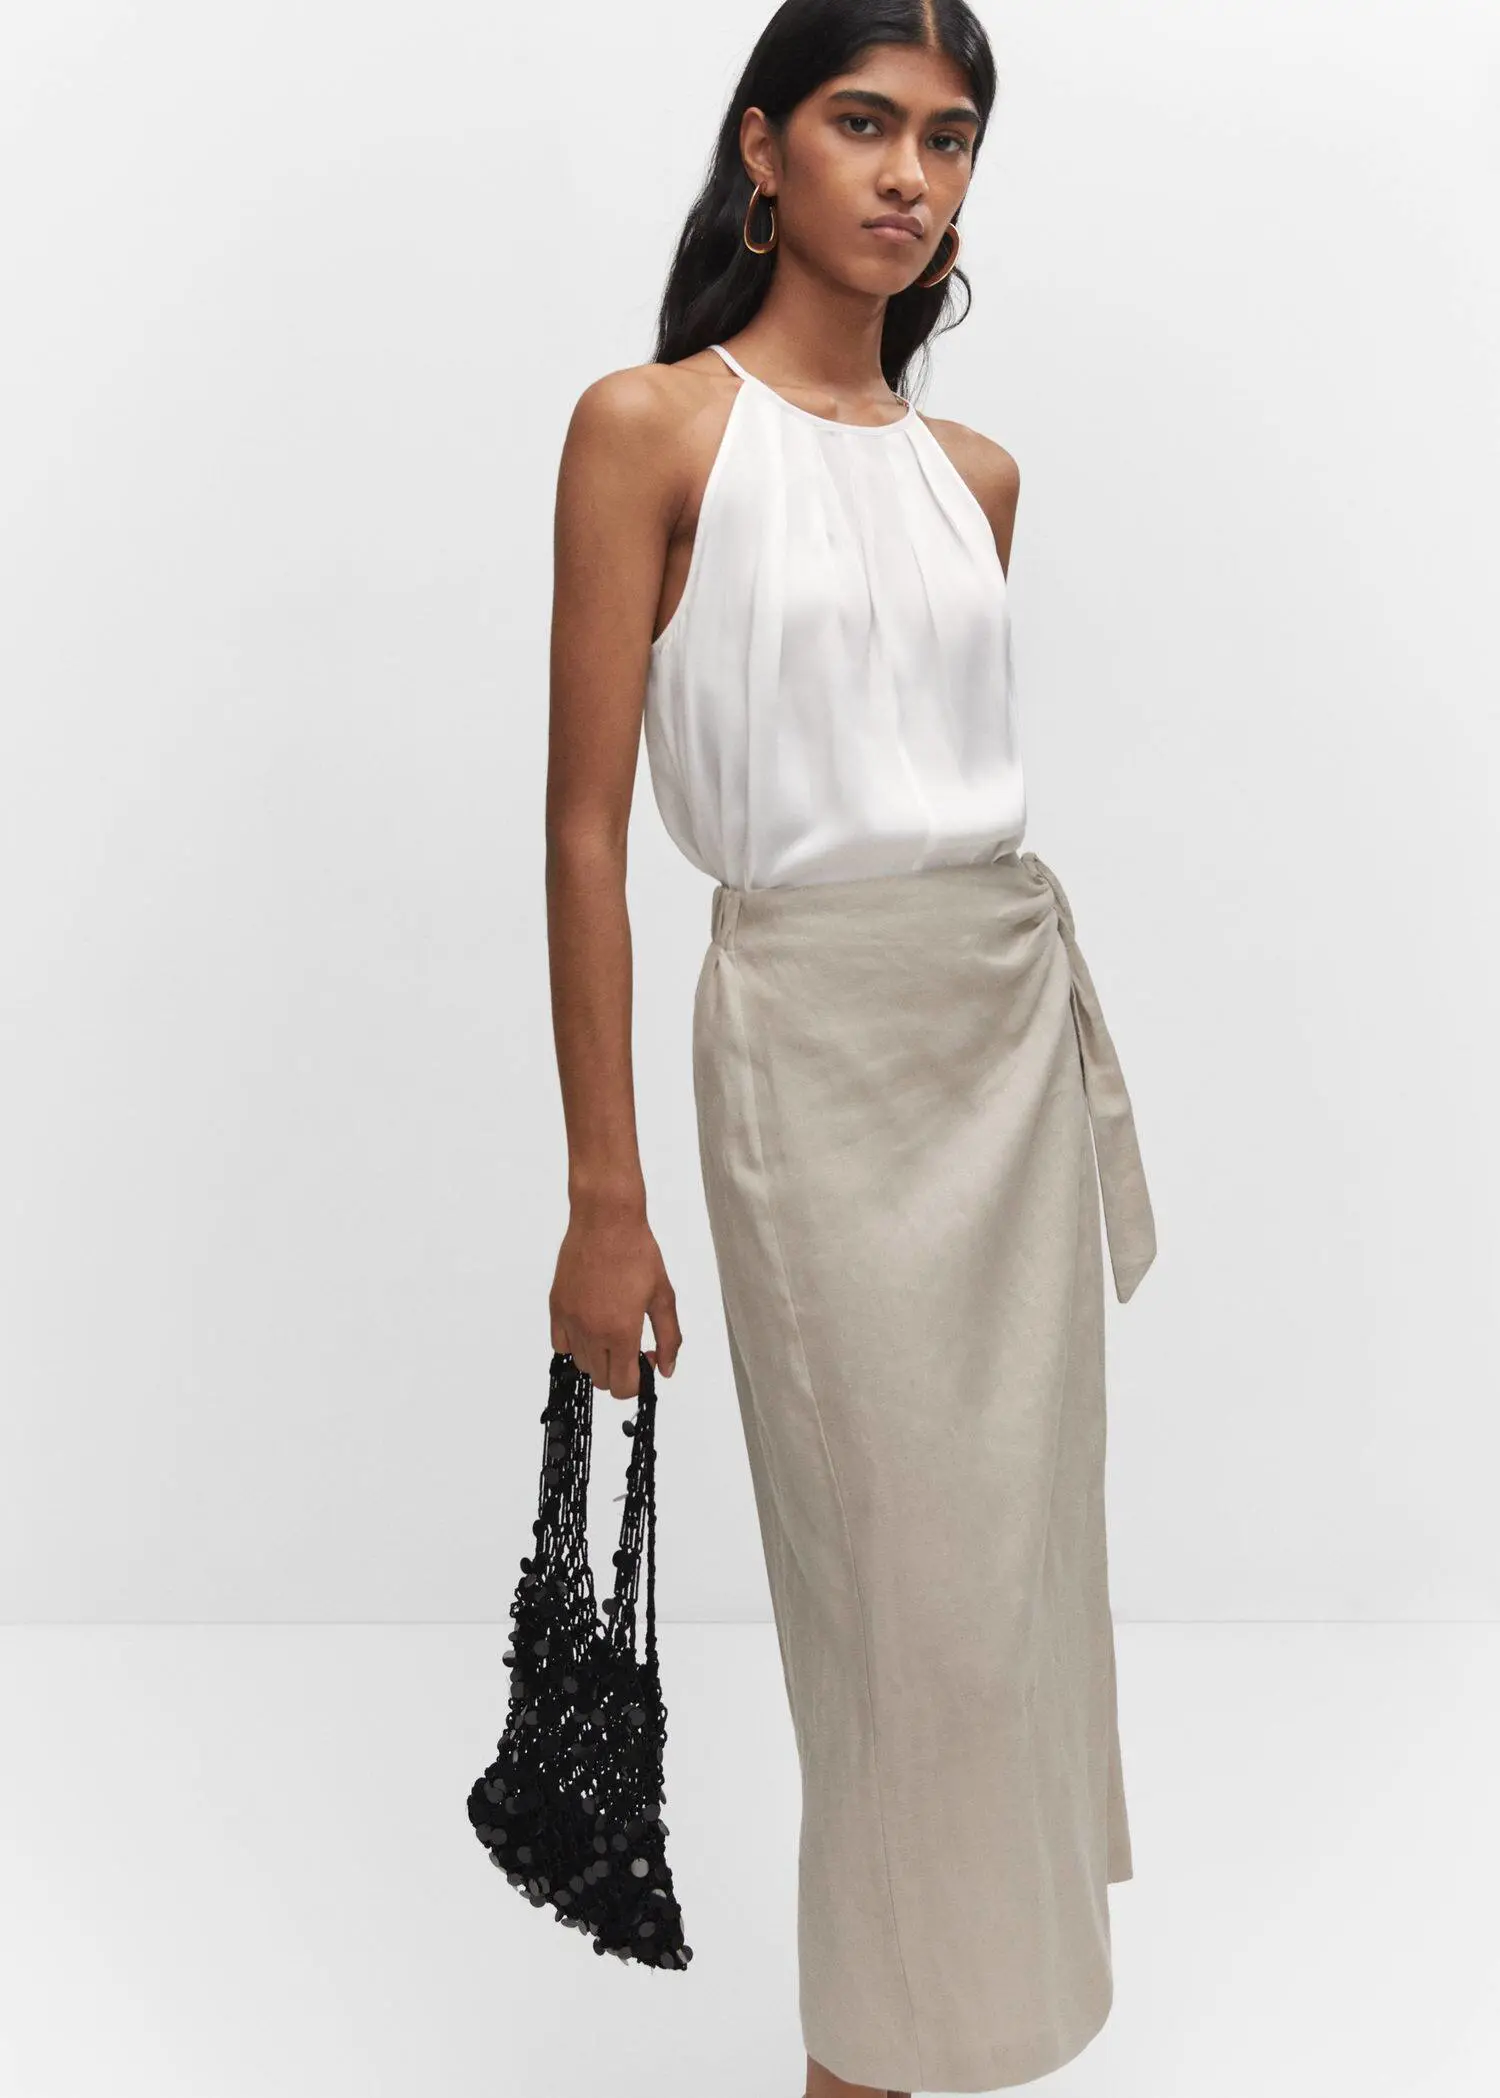 Mango Satin halter-neck top. a woman in a white top and a beige skirt. 